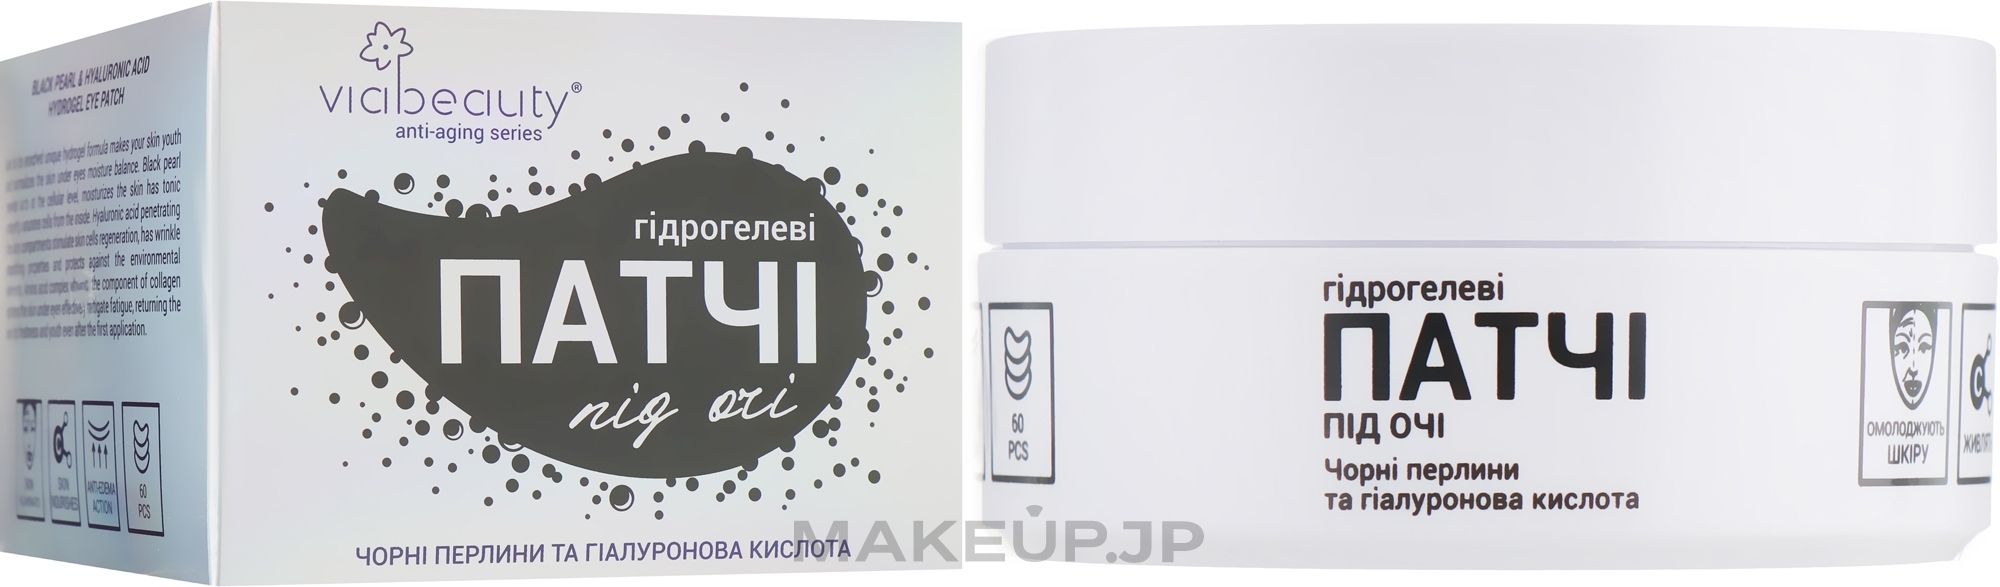 Hydrogel Patch with Black Pearl & Hyaluronic Acid - Viabeauty — photo 60 szt.